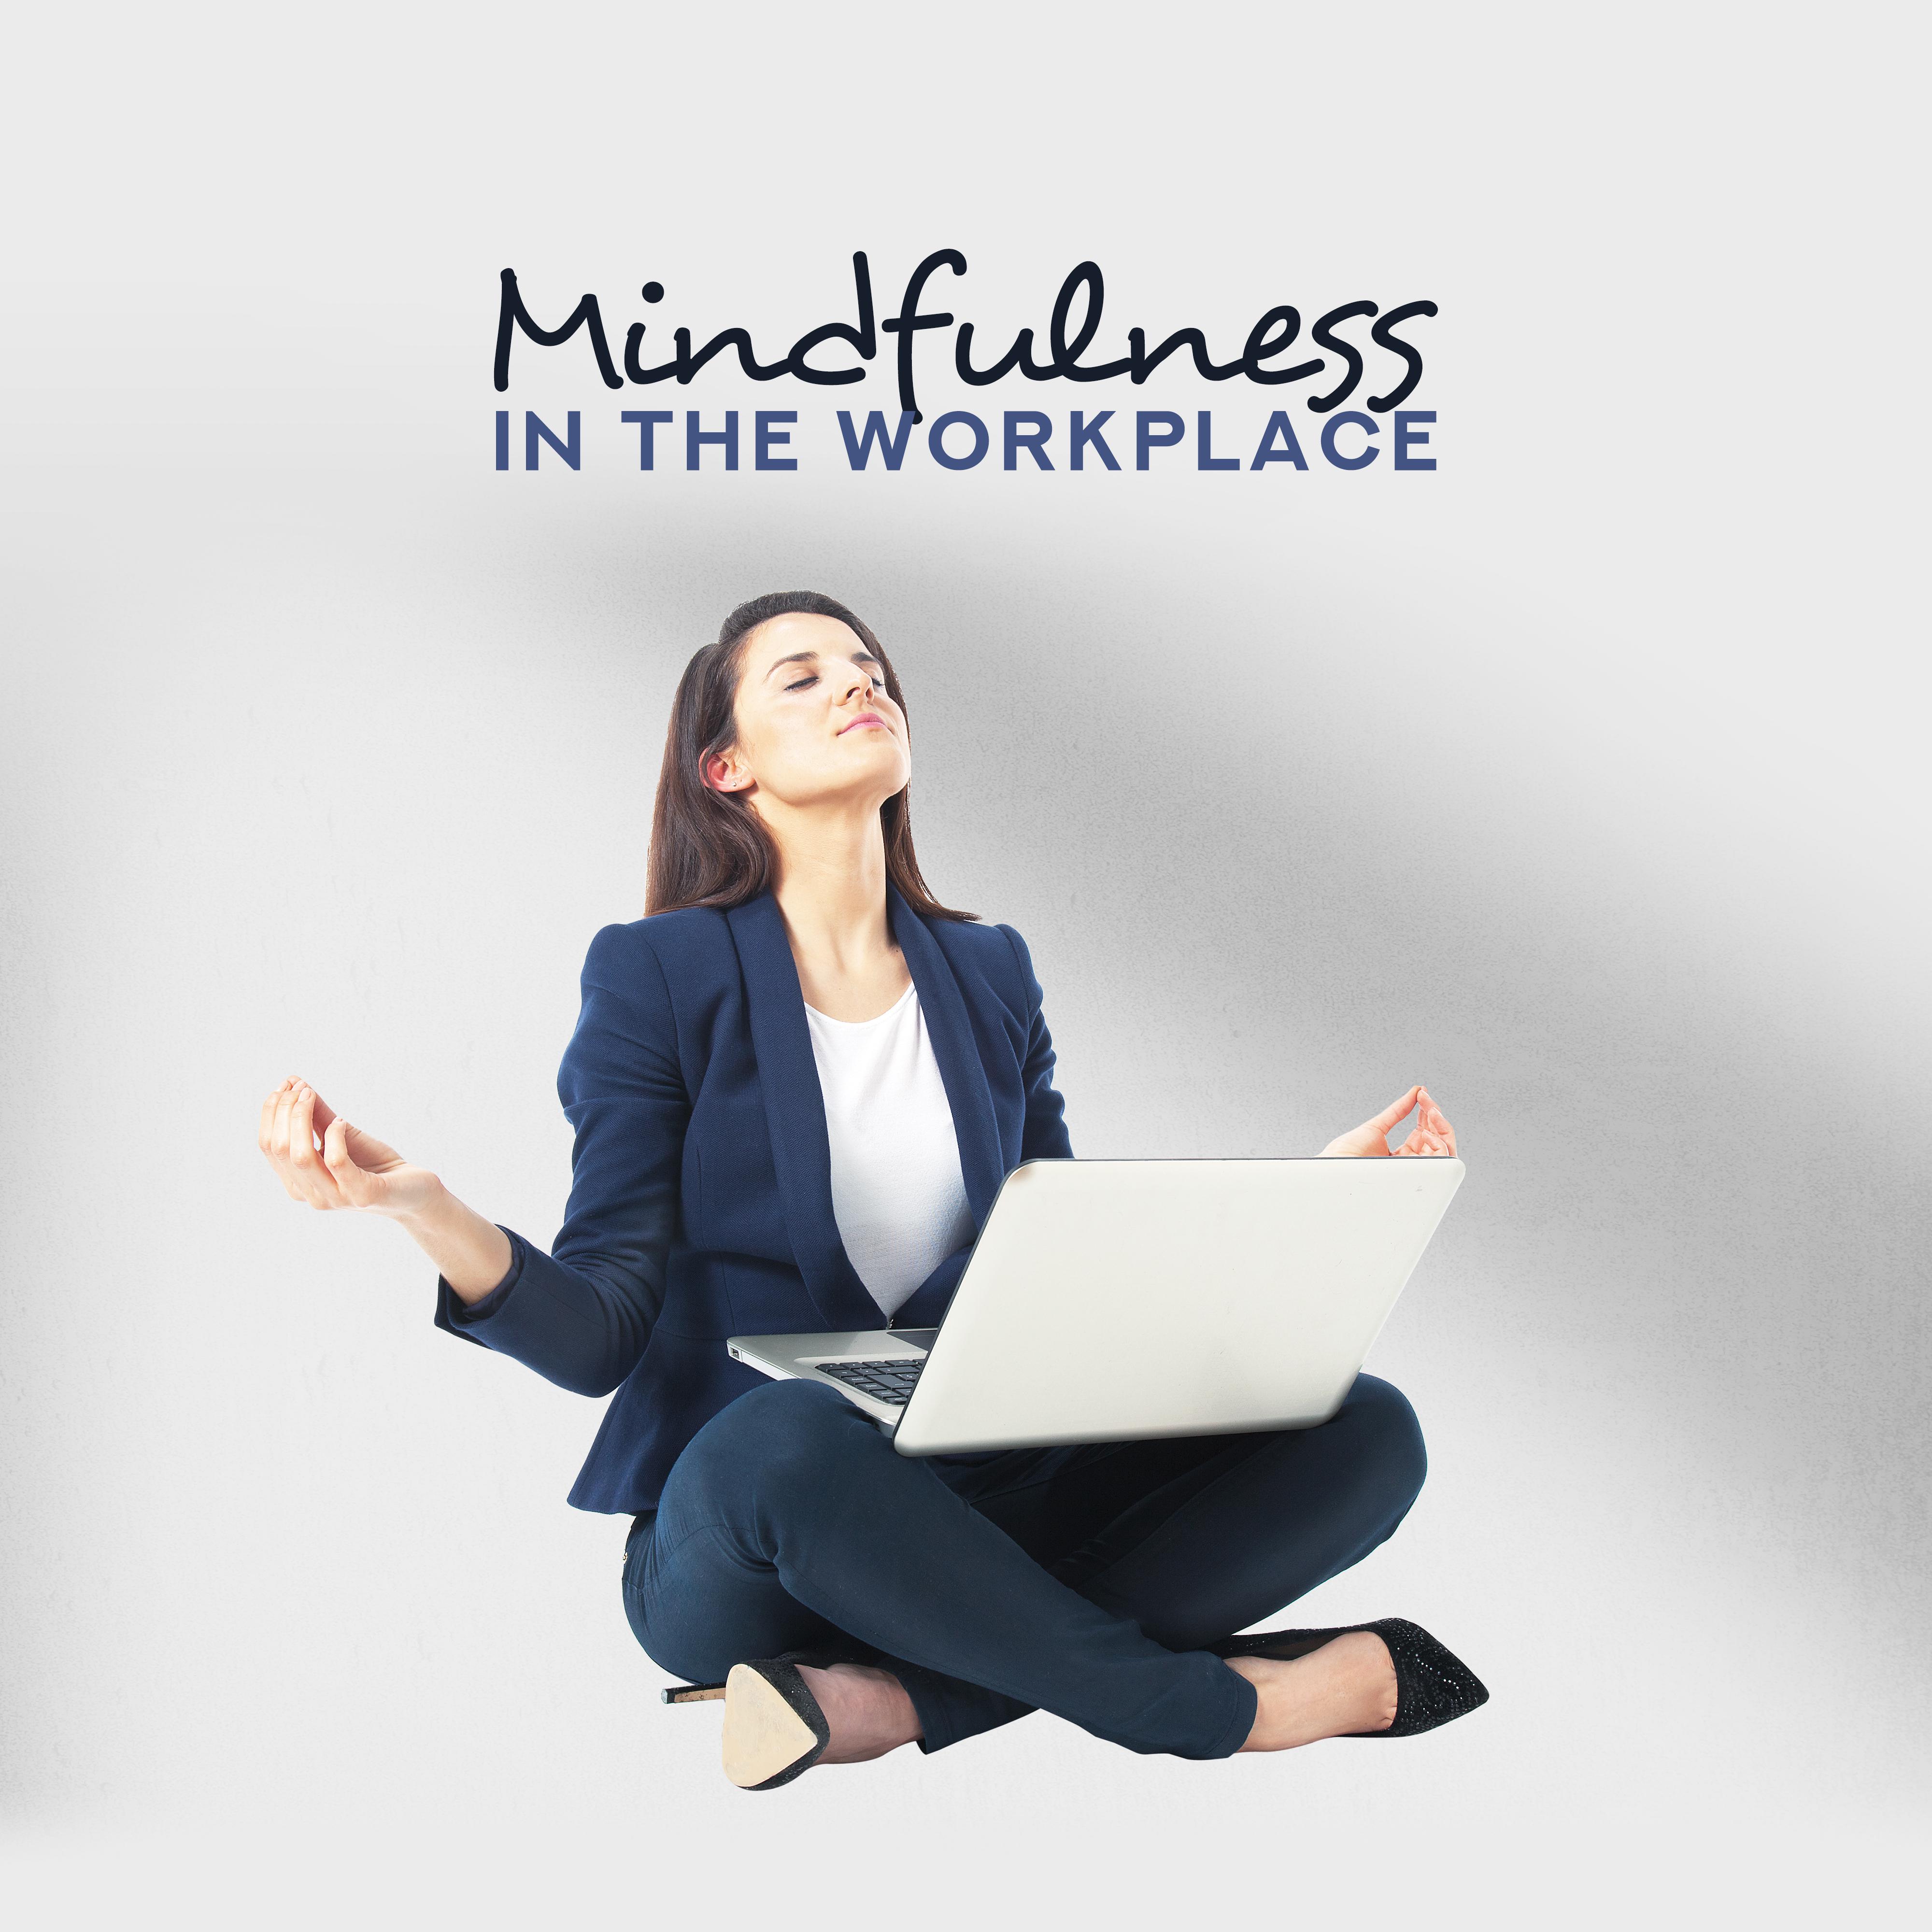 Mindfulness in the Workplace – Music for Meditation, Improves Concentration, Productivity and Well-being, Reduces Stress and Tension, Increases the Ability of Creative Thinking and Perception